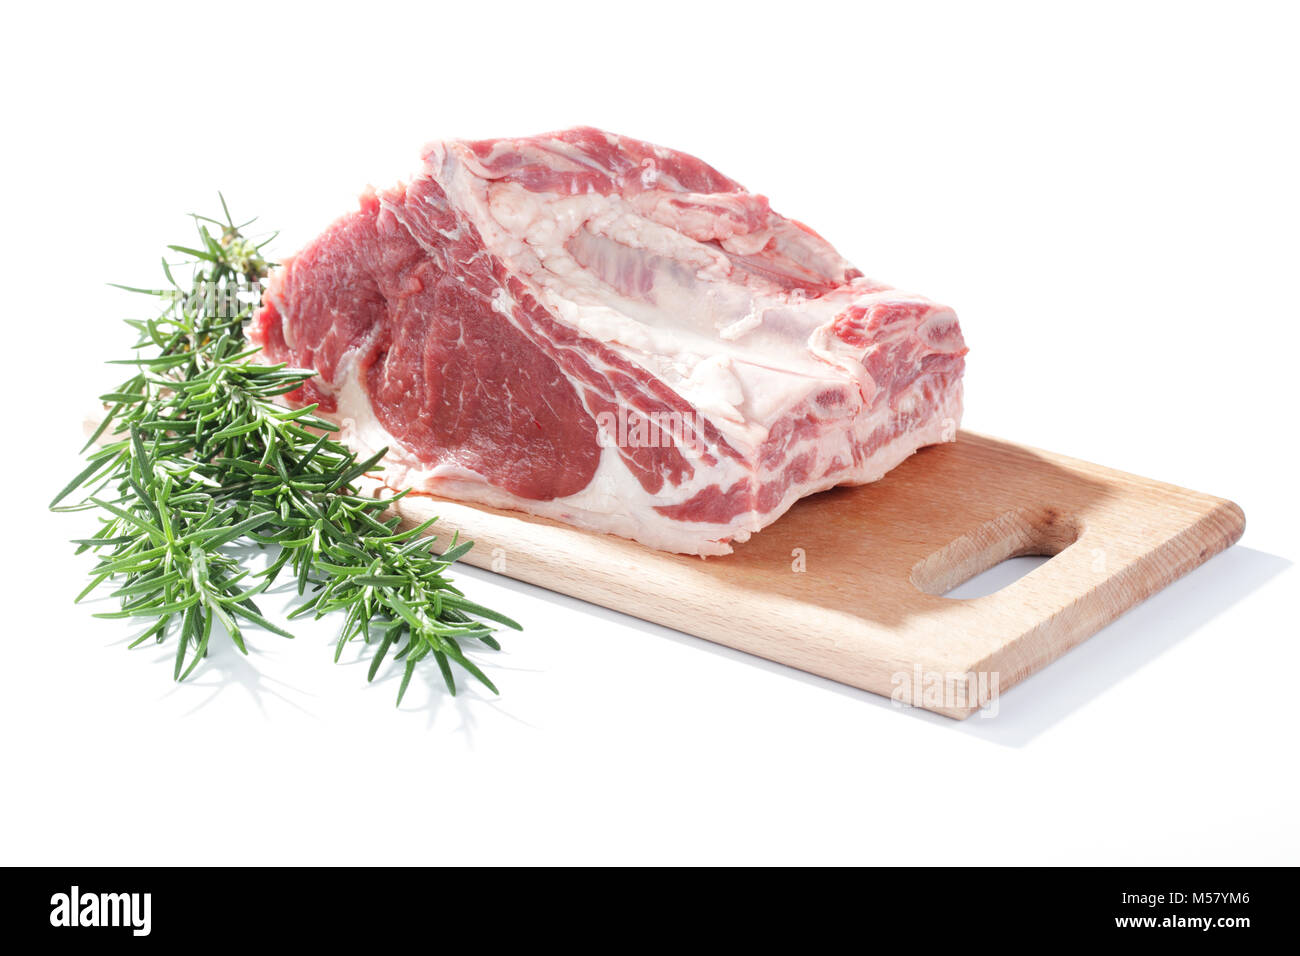 Beef ribs and rosemary on a wooden cutting board Stock Photo